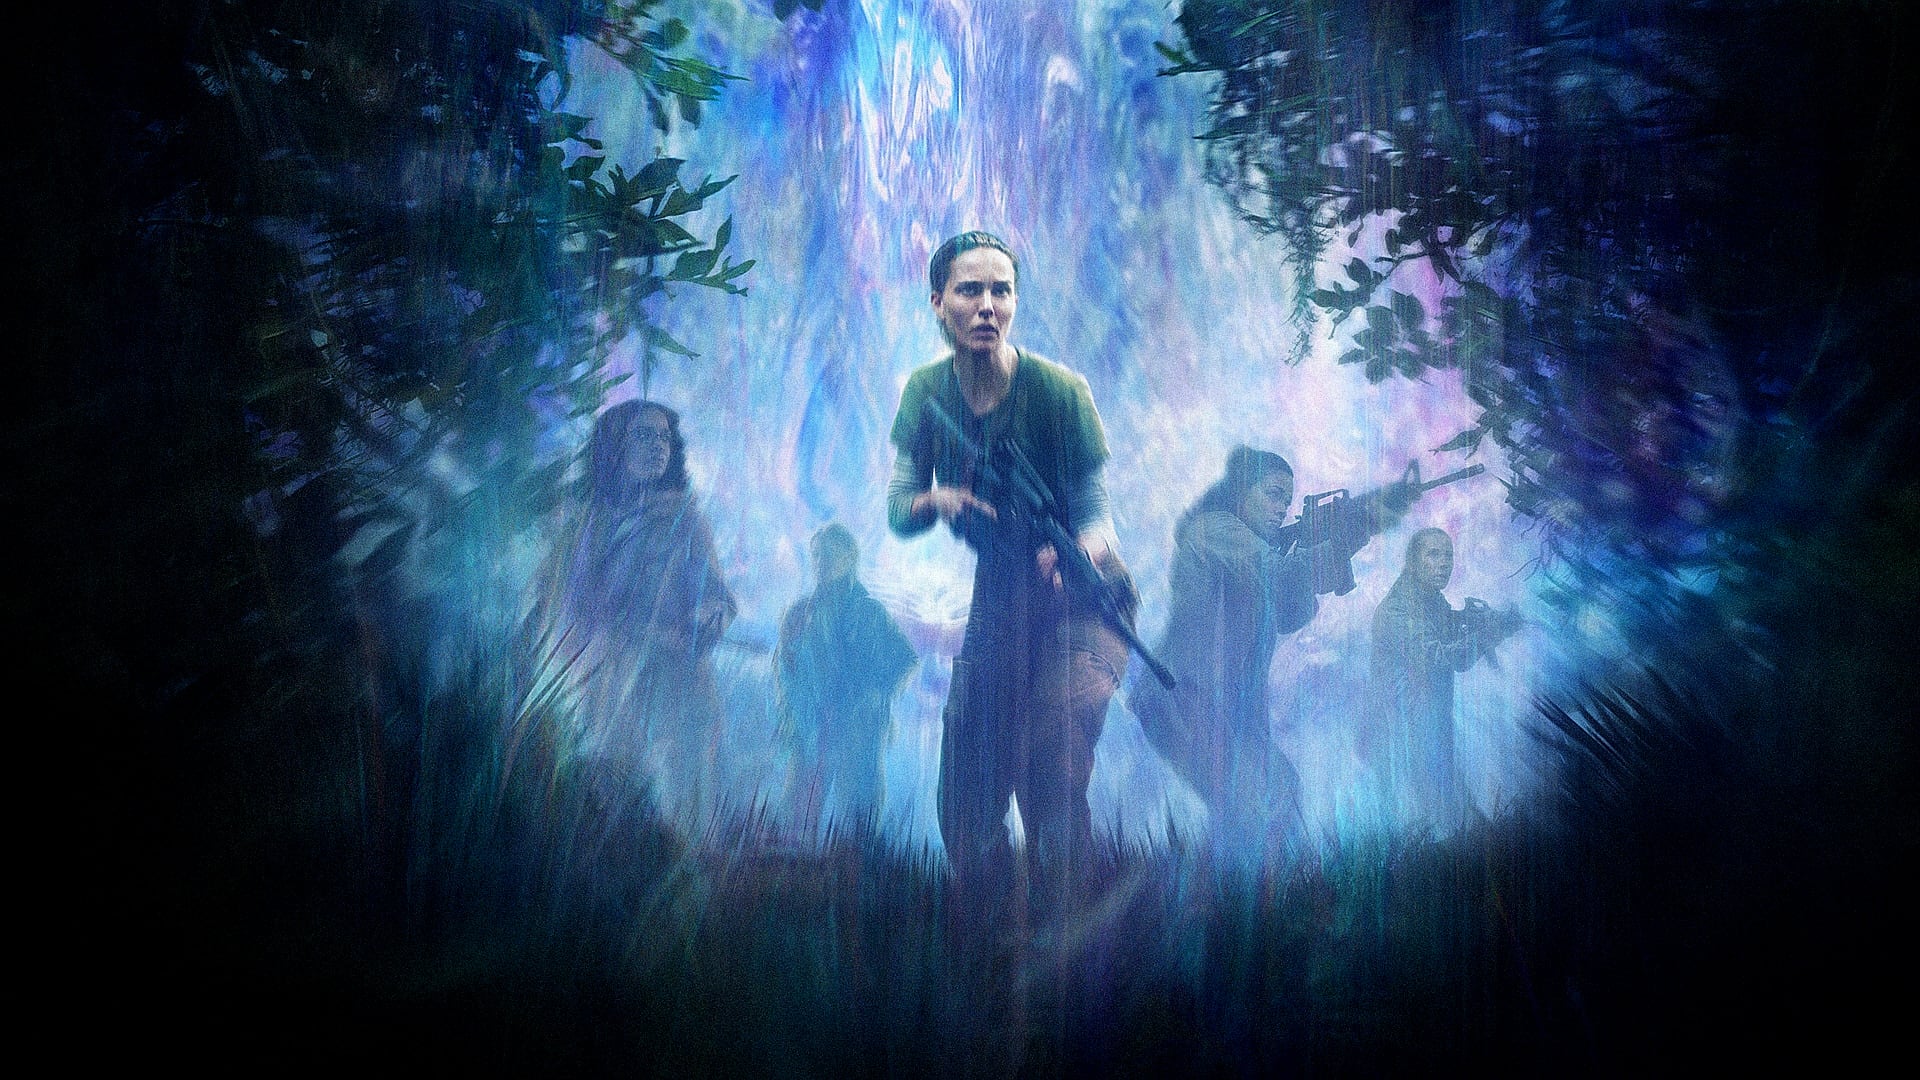 Annihilation review: Alex Garland continues to bring smart sci-fi to the masses